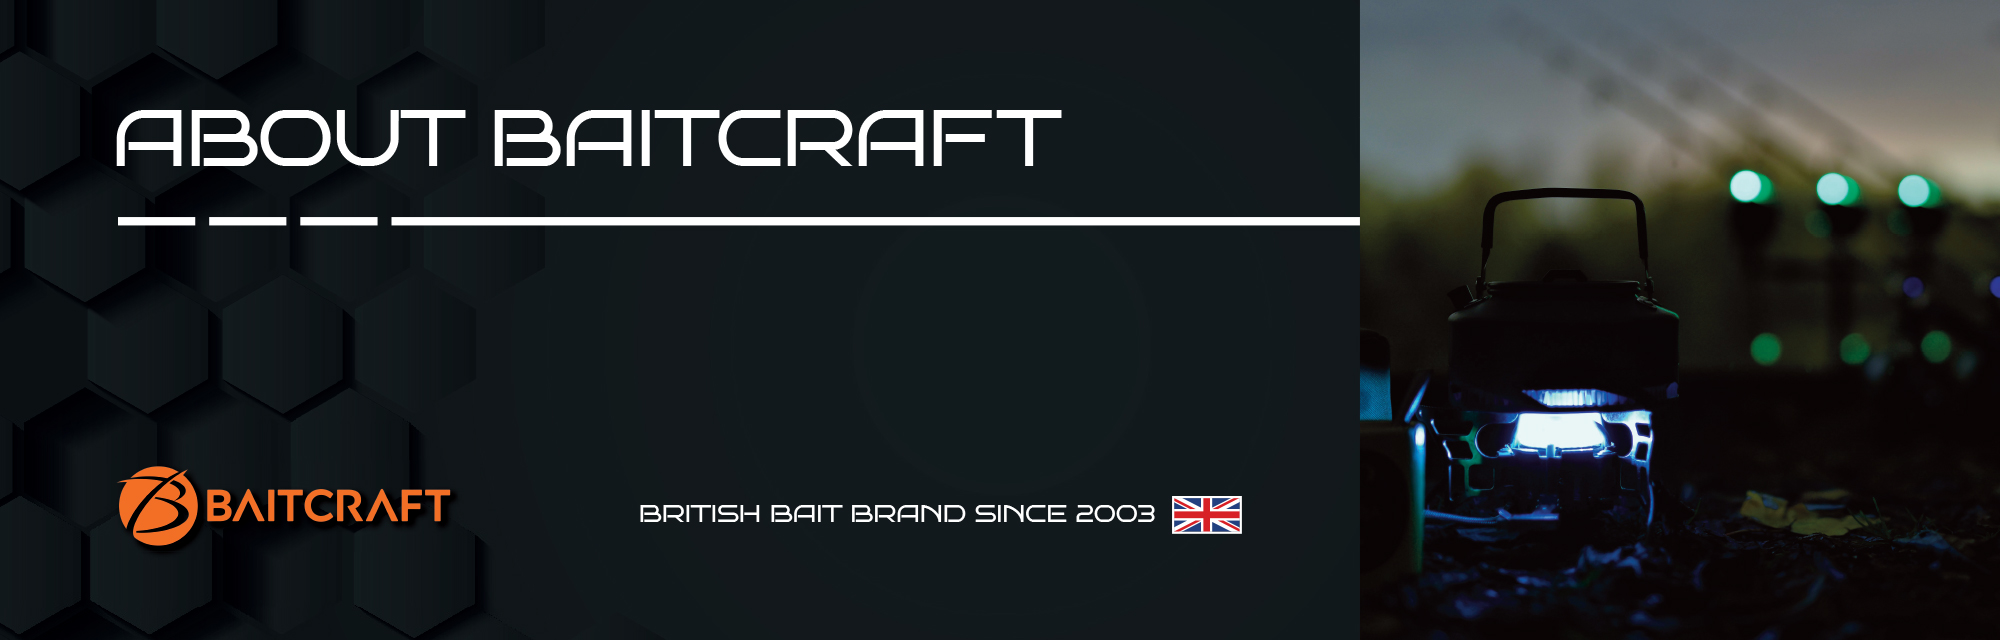 BAITCRAFT | ABOUT US - about-us 